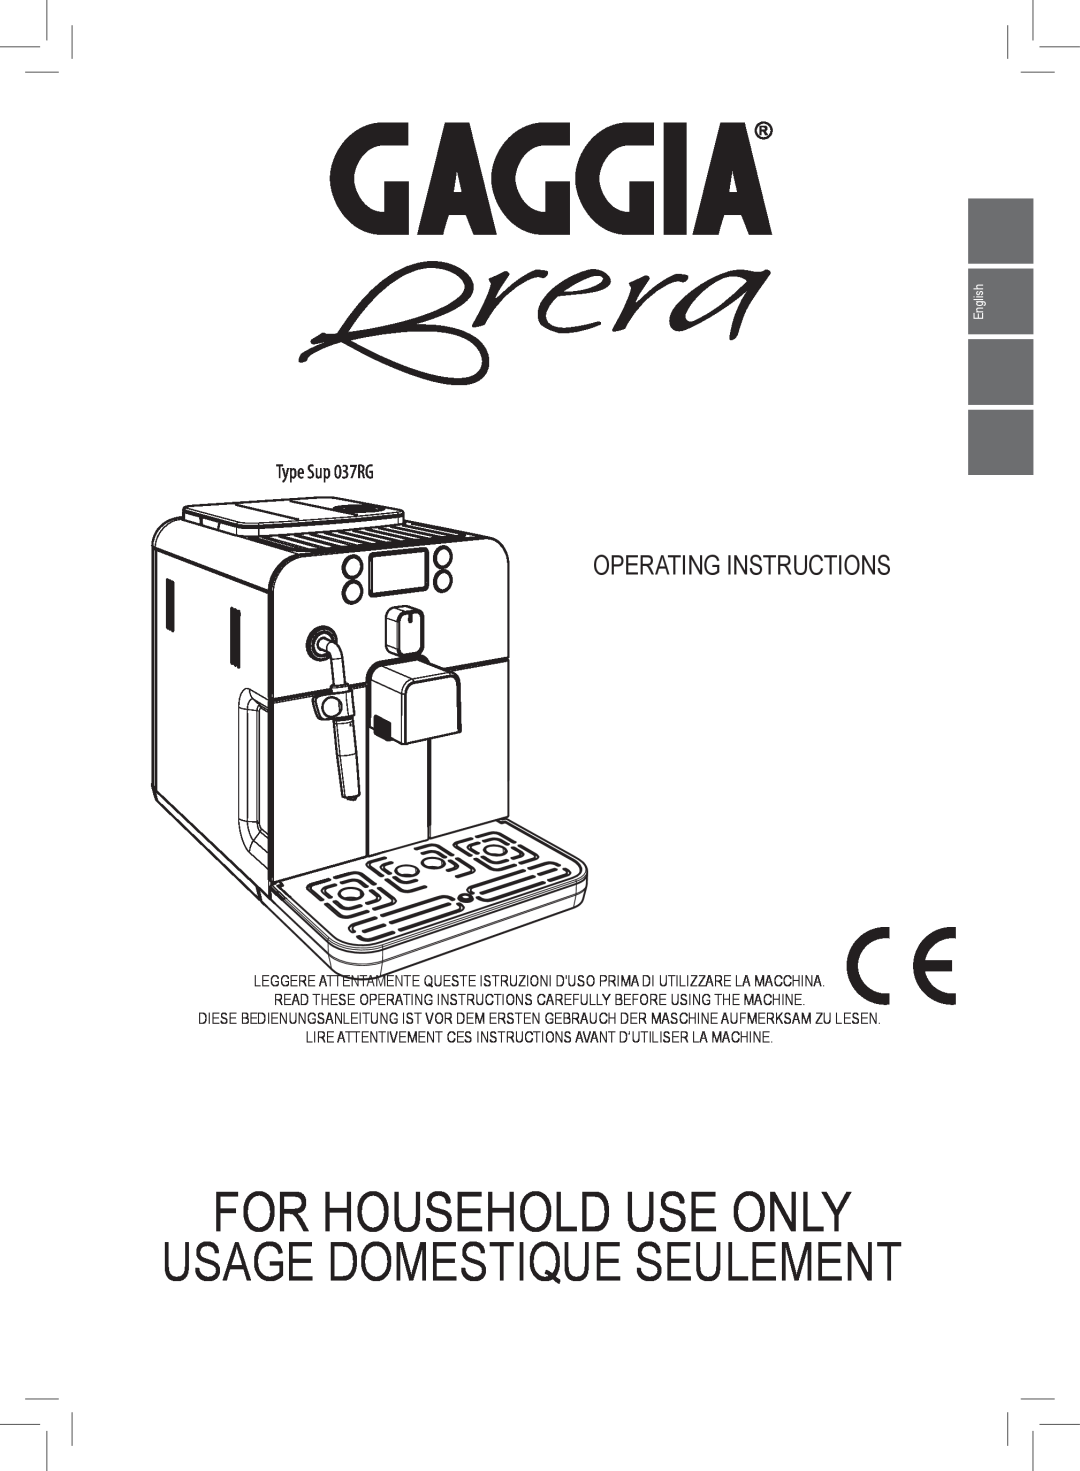 Gaggia manual Usage Domestique Seulement, For Household Use Only, Type Sup 037RG, English 